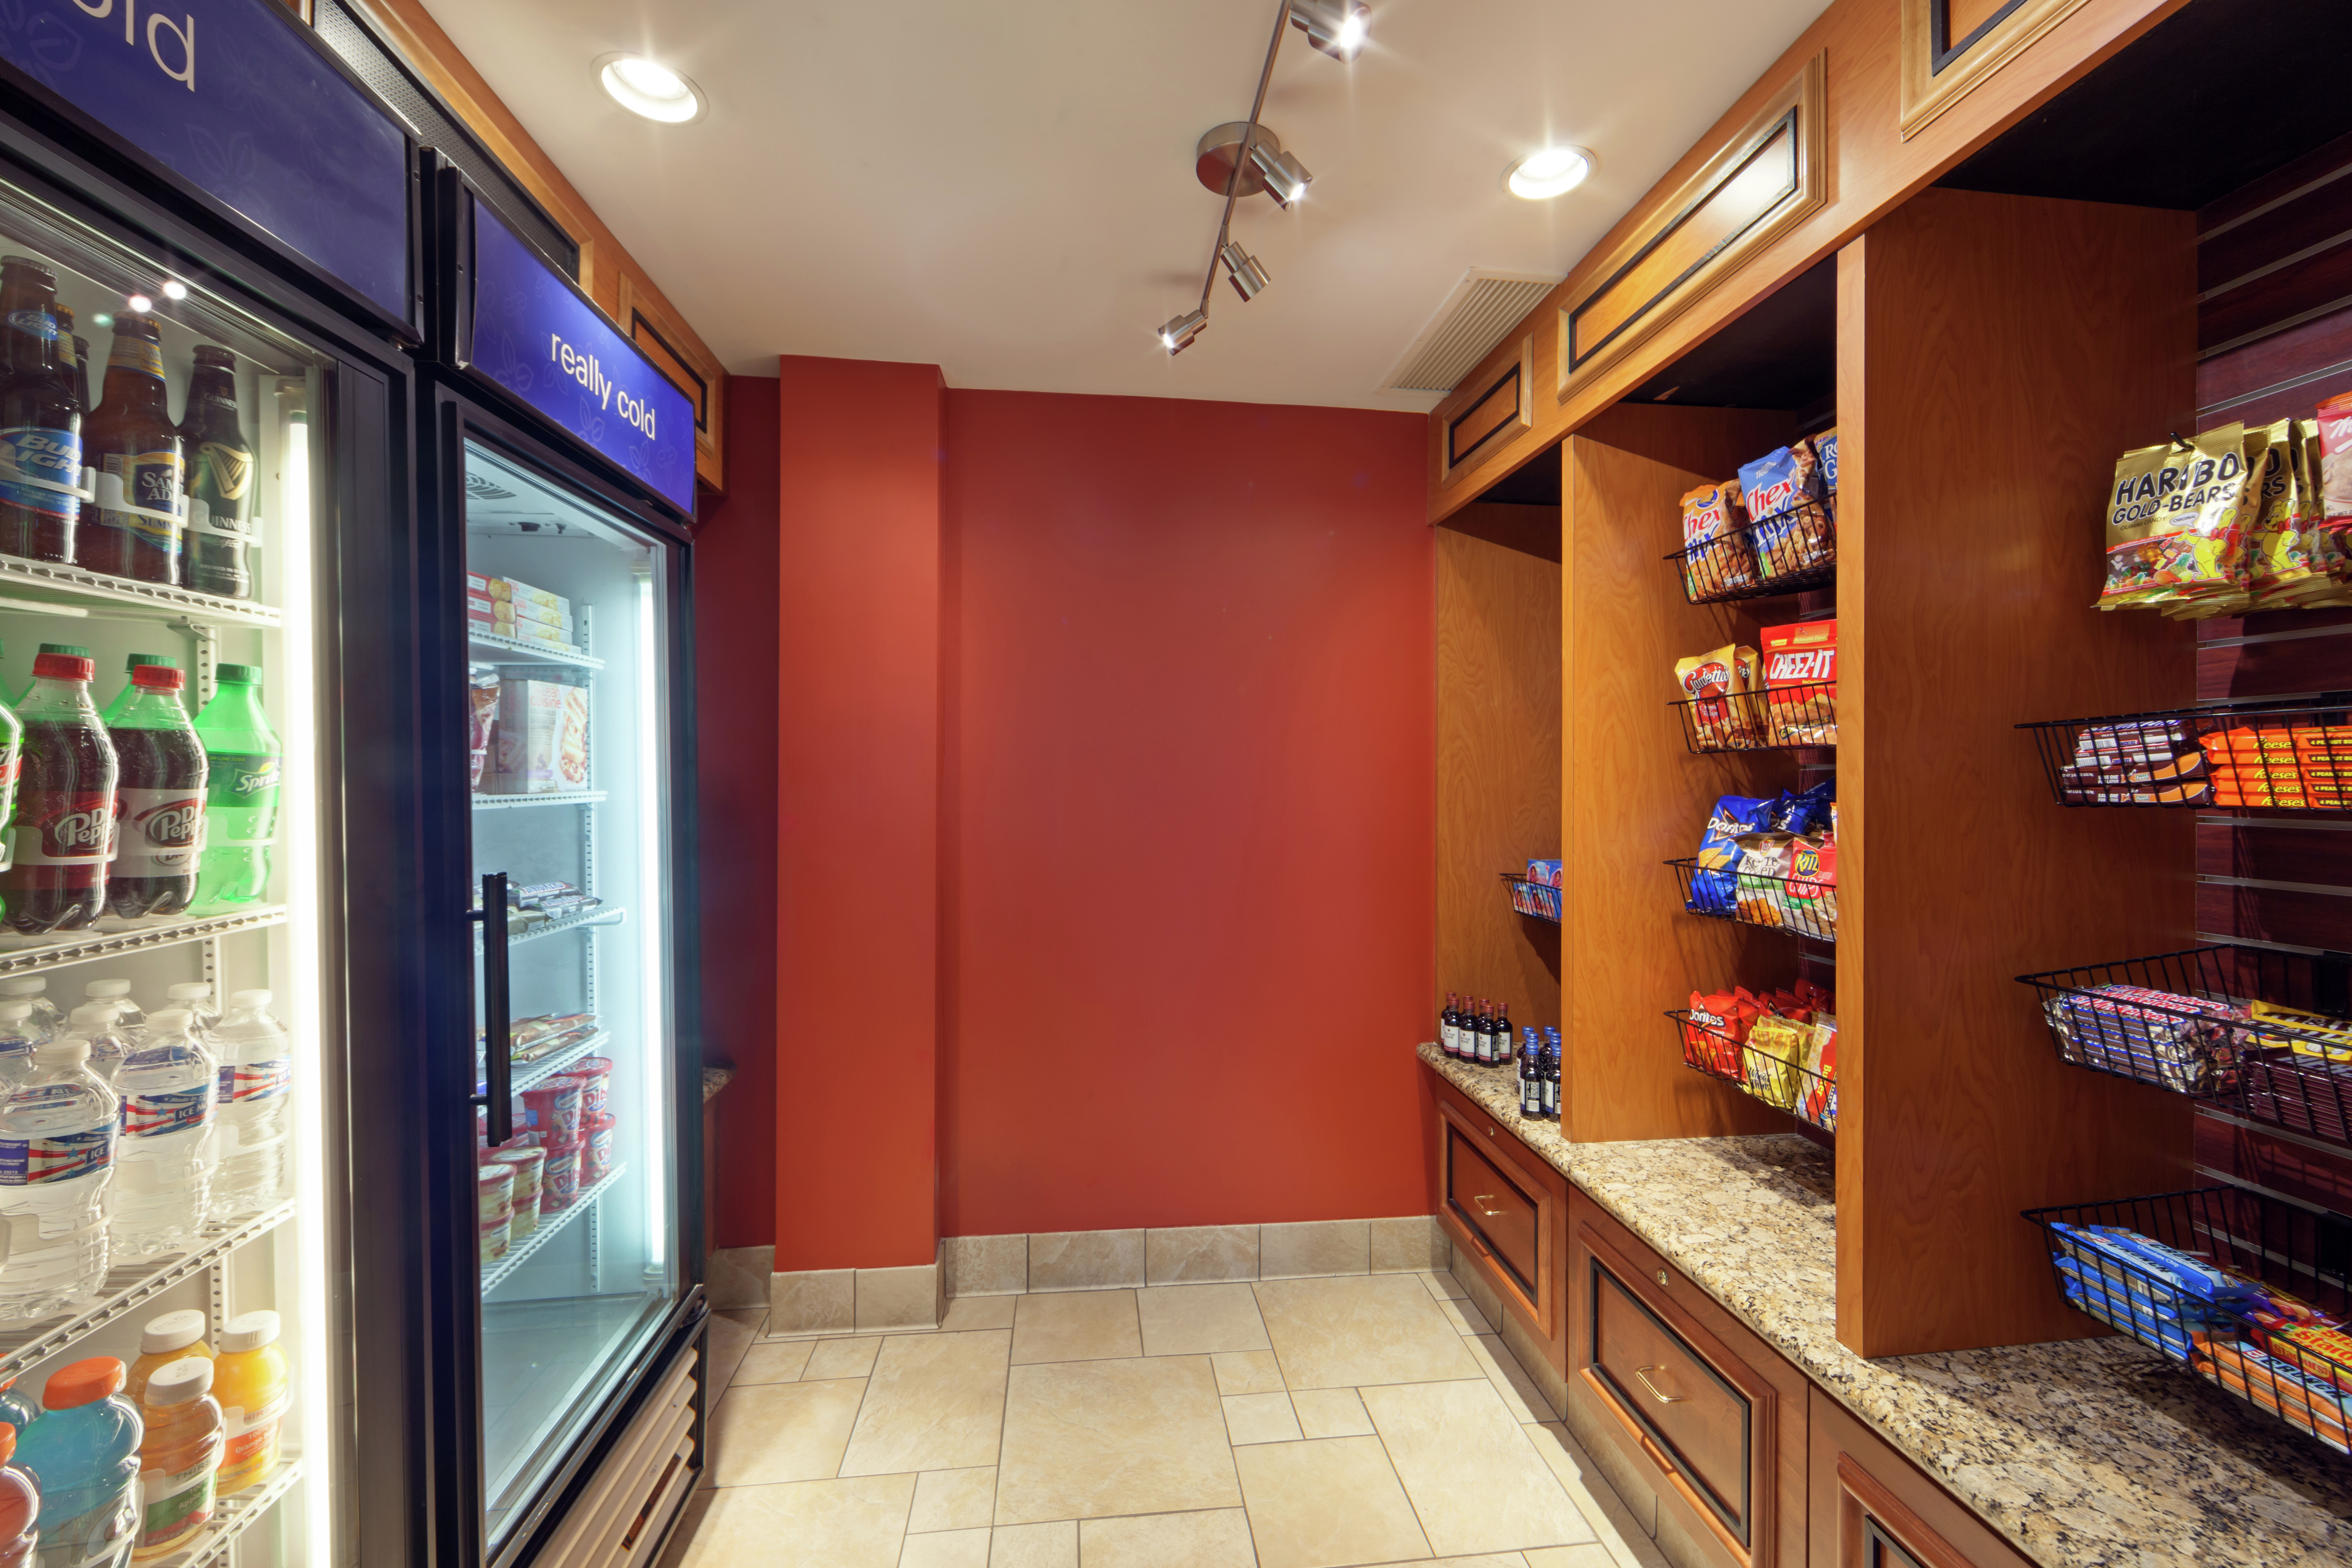 Snacks, Cold Beverages, and Convenience Items Available for Guest Purchase at Pavilion Pantry